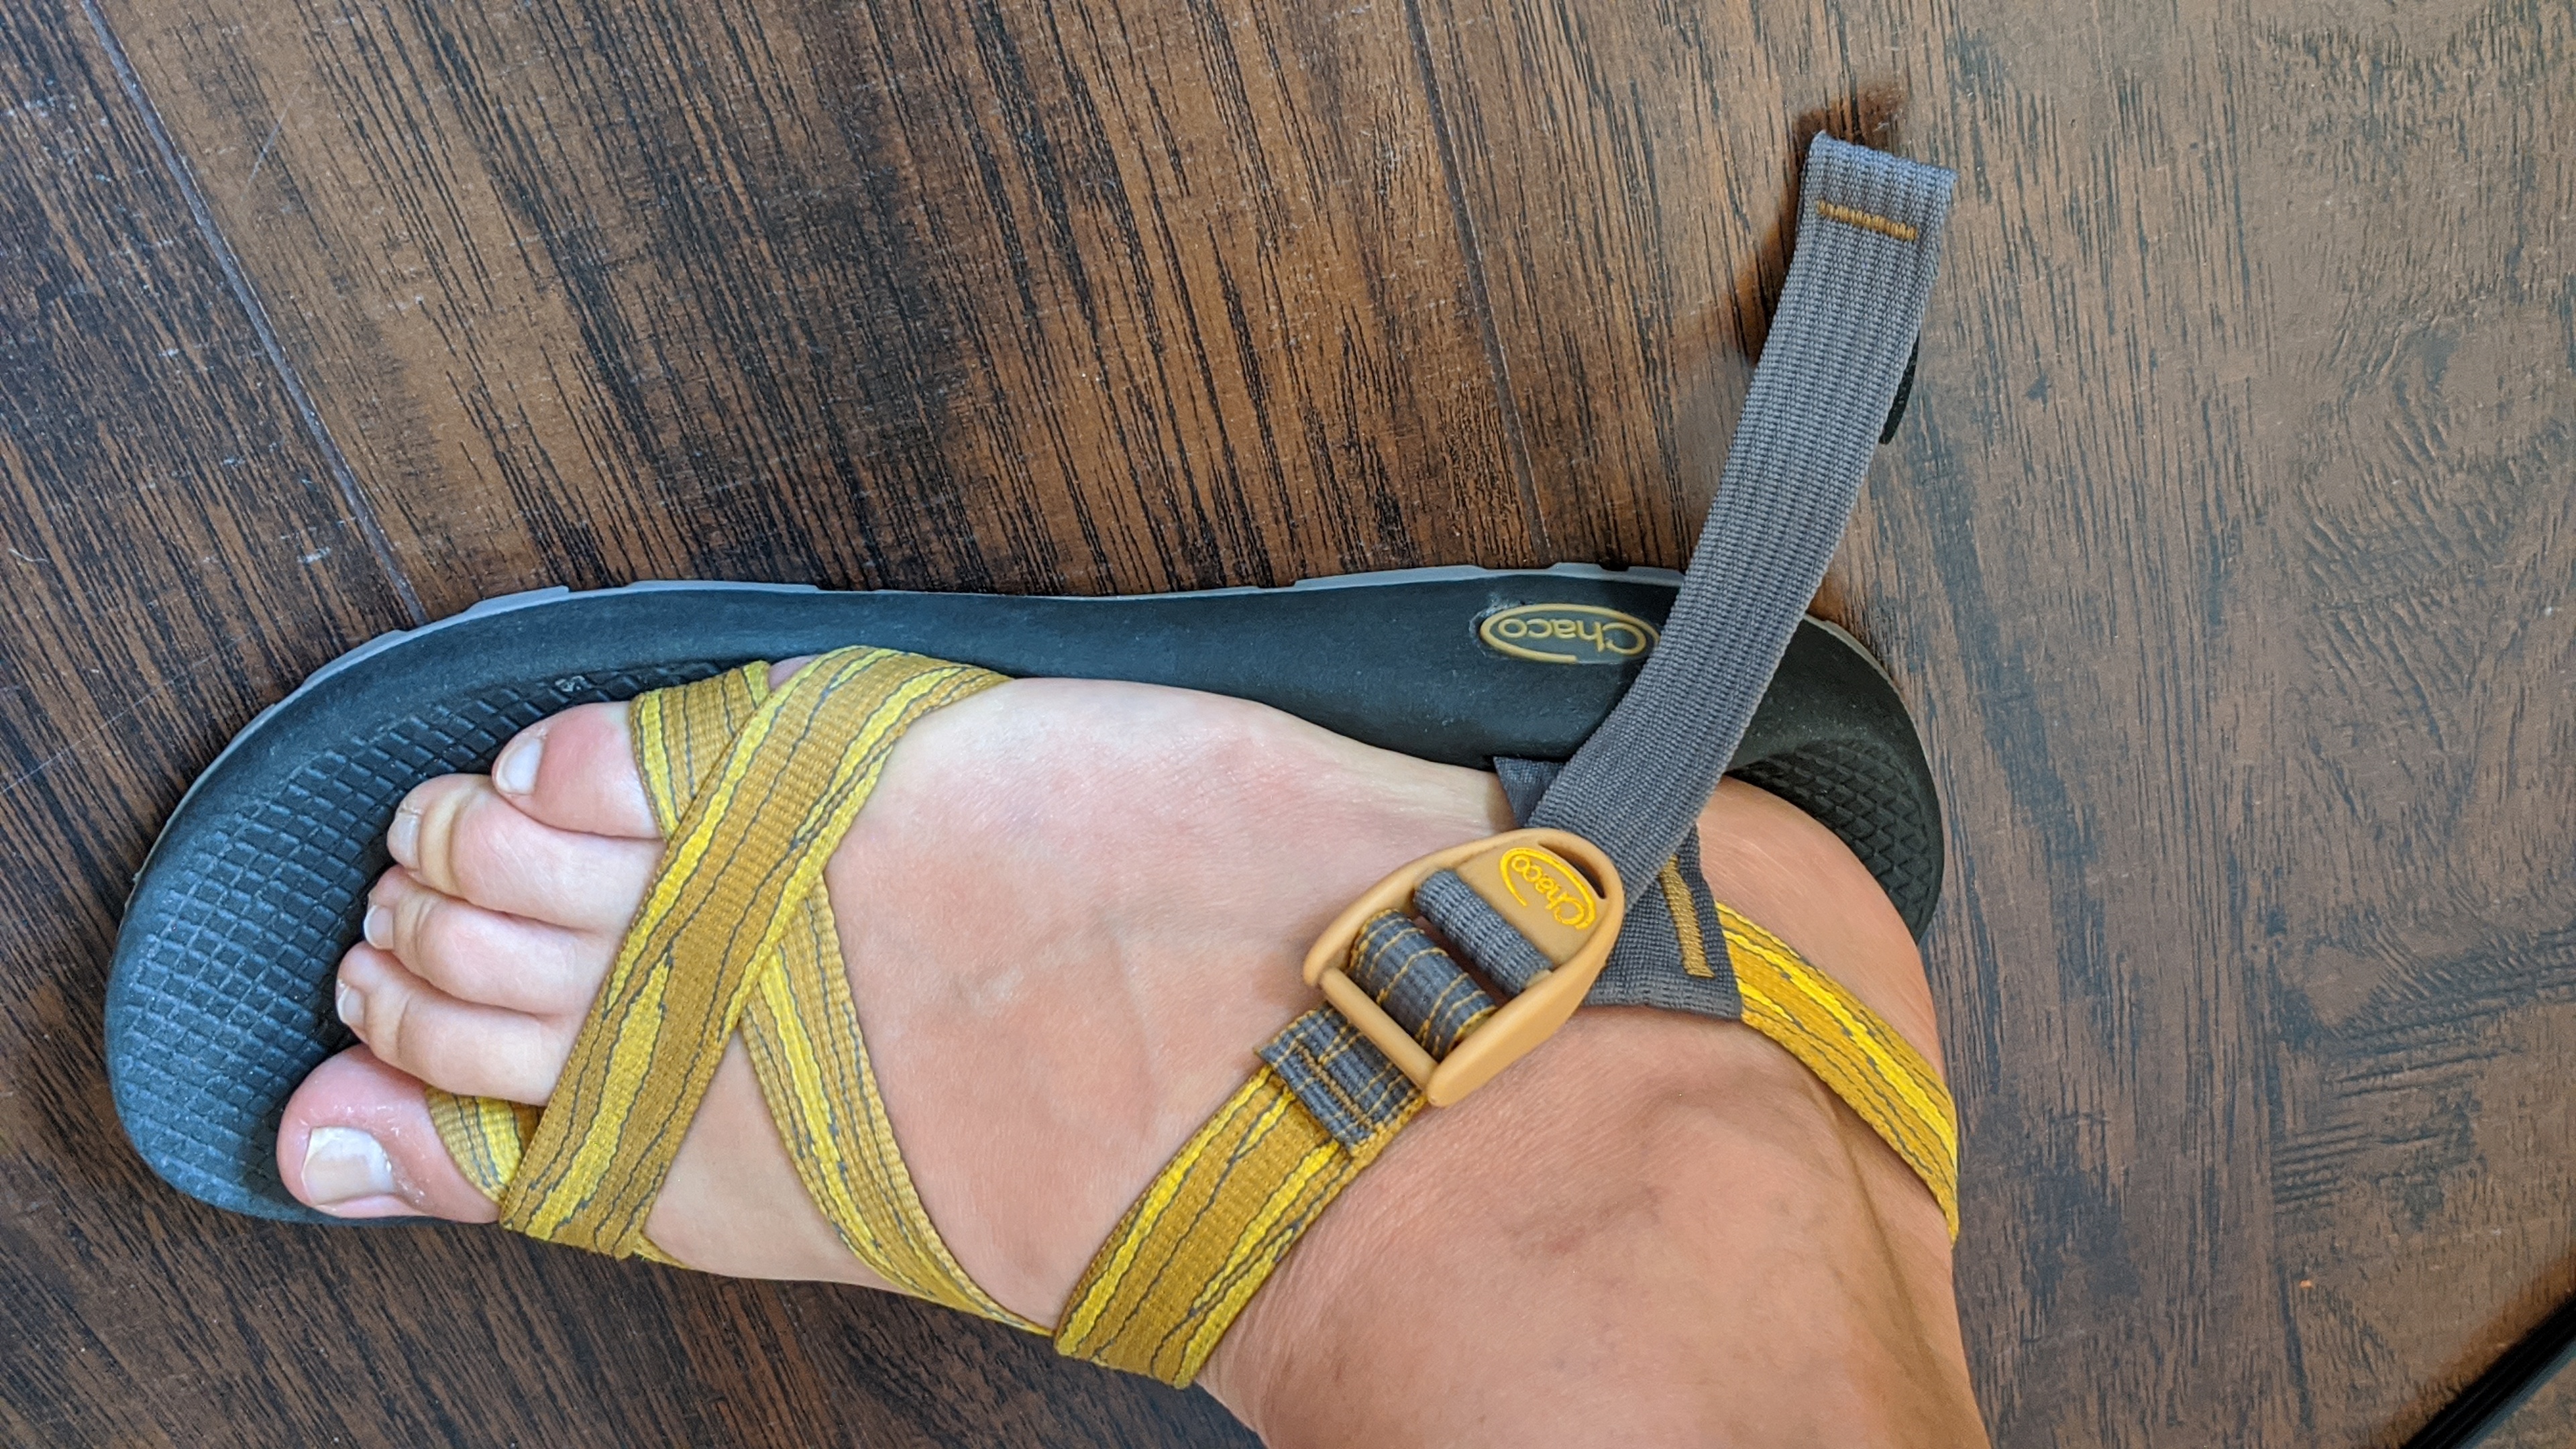 chaco toe strap keeps tightening